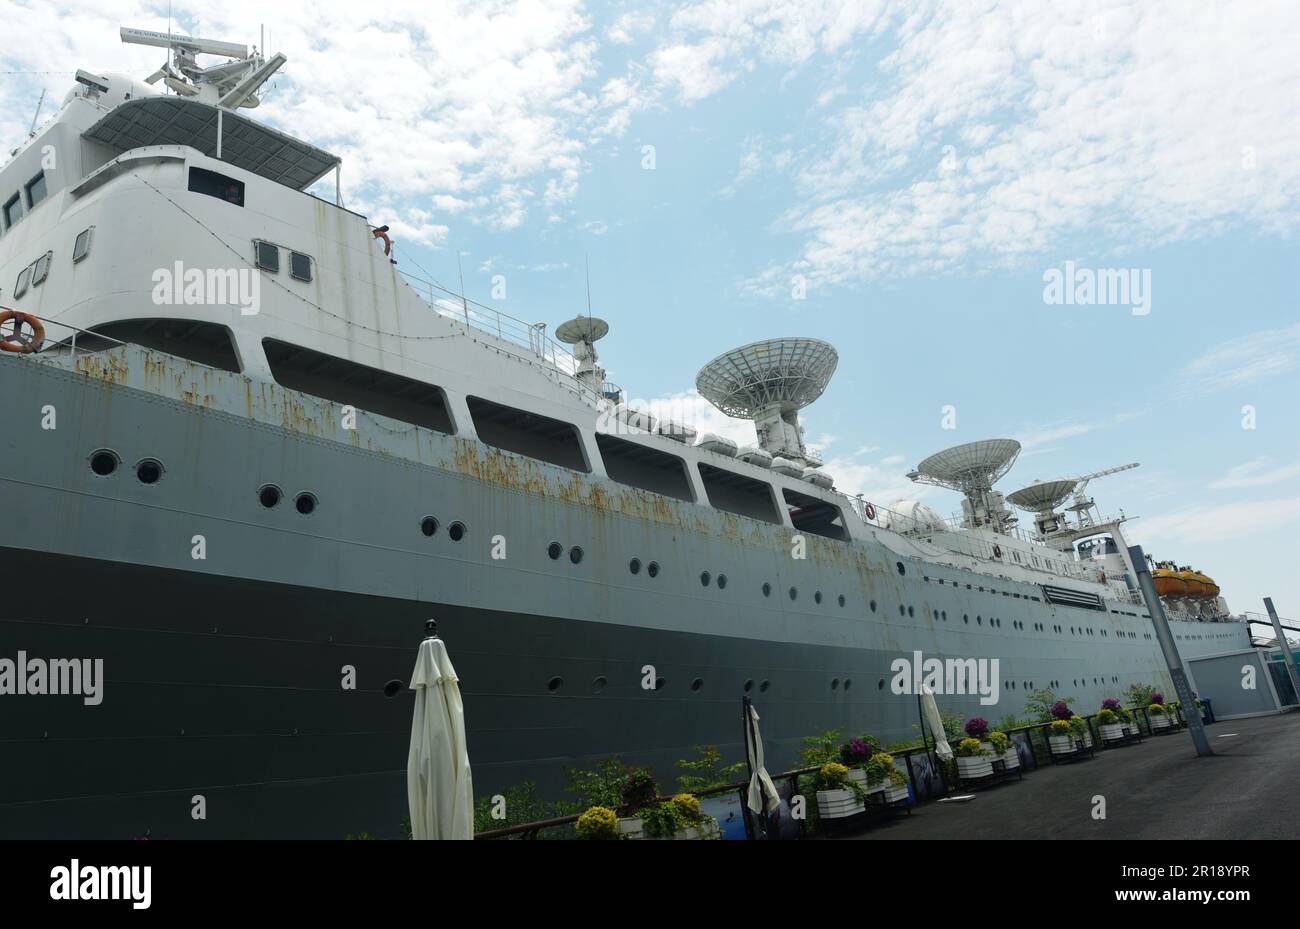 SHANGHAI, CHINA - MAY 10, 2023 - The Yuanwang-1 survey ship is seen in Dock 2 at the original site of Shanghai Jiangnan Shipyard in Shanghai, China, May 10, 2023. Yuanwang-1 is the first generation integrated space oceangoing survey ship designed and built by China. Yuanwang-1 made 44 ocean expeditions in 32 years from 1978 to 2010, safely sailed for more than 2,600 days and 440,000 nautical miles, and successfully completed 57 major national scientific research and test missions, including intercontinental missiles, submarine-launched missiles, various domestic and foreign satellites and mann Stock Photo